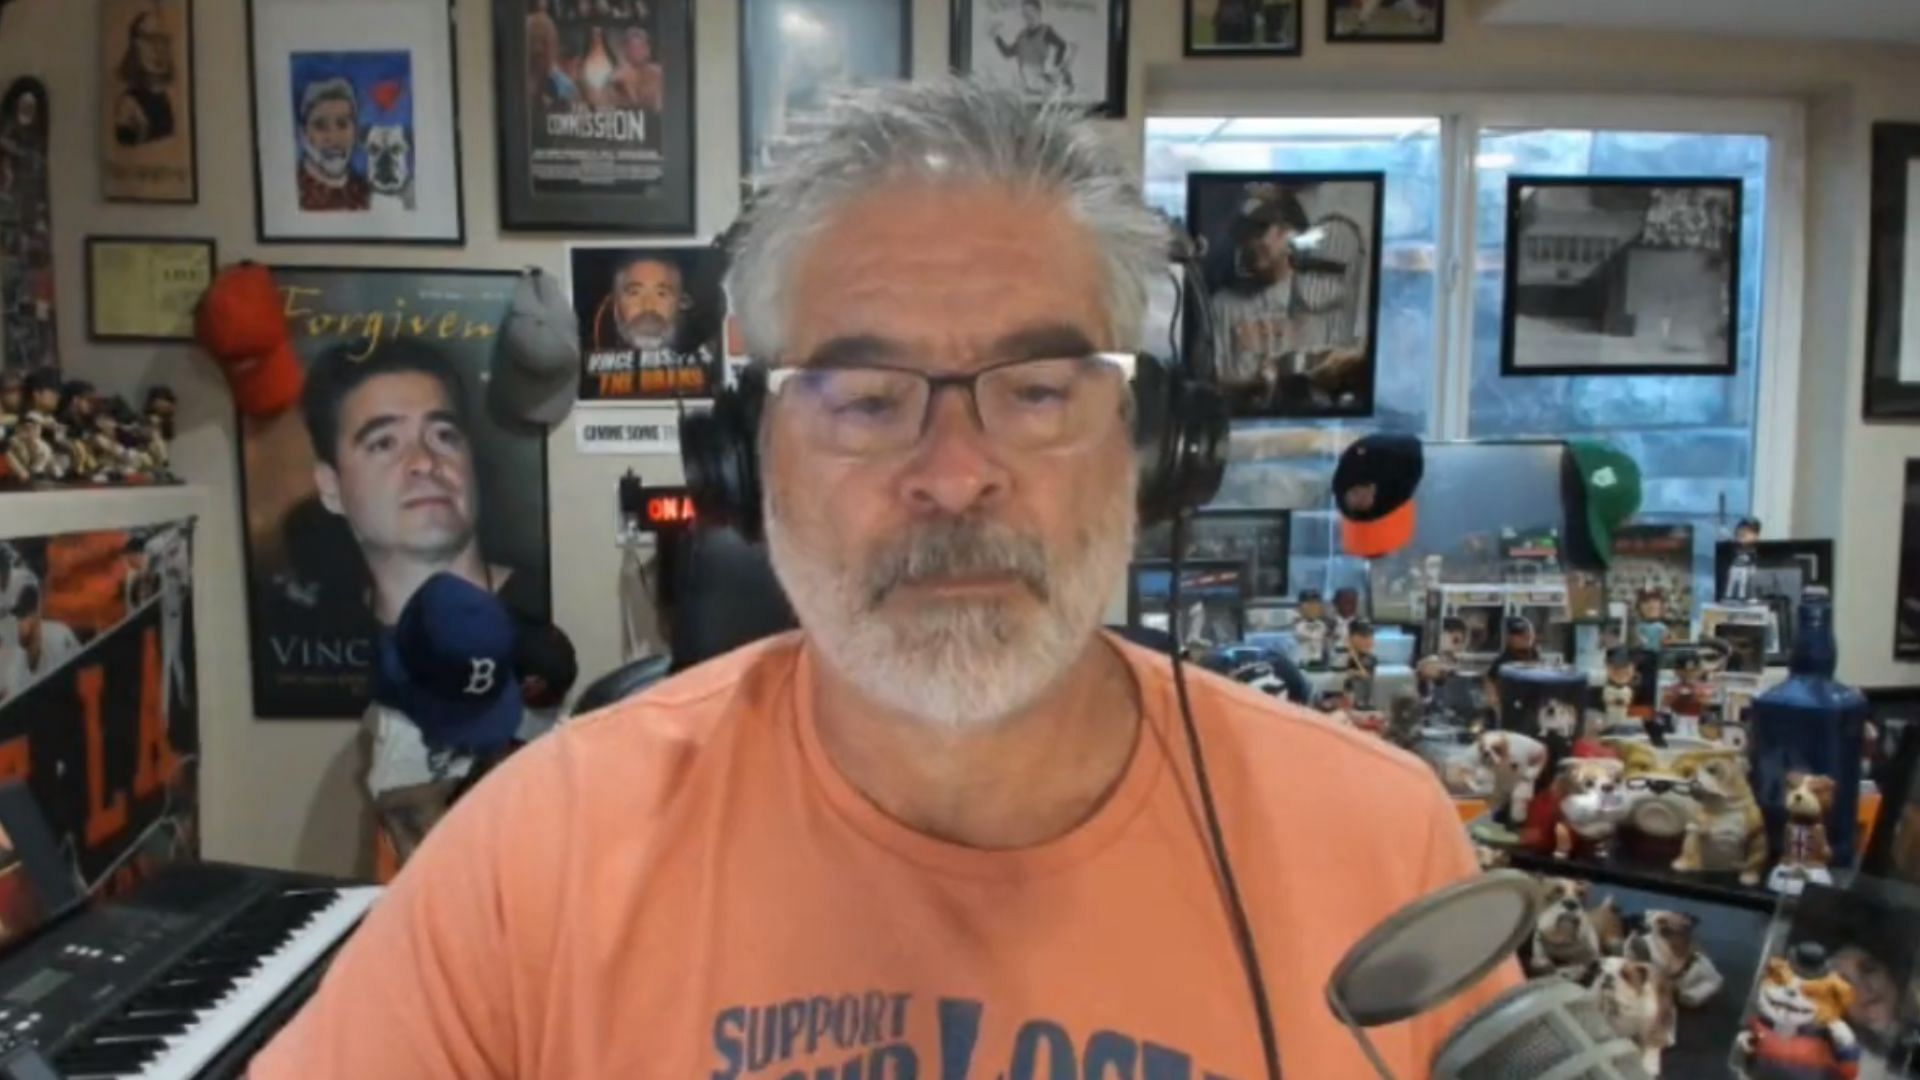 Vince Russo was a former writer for the WWE